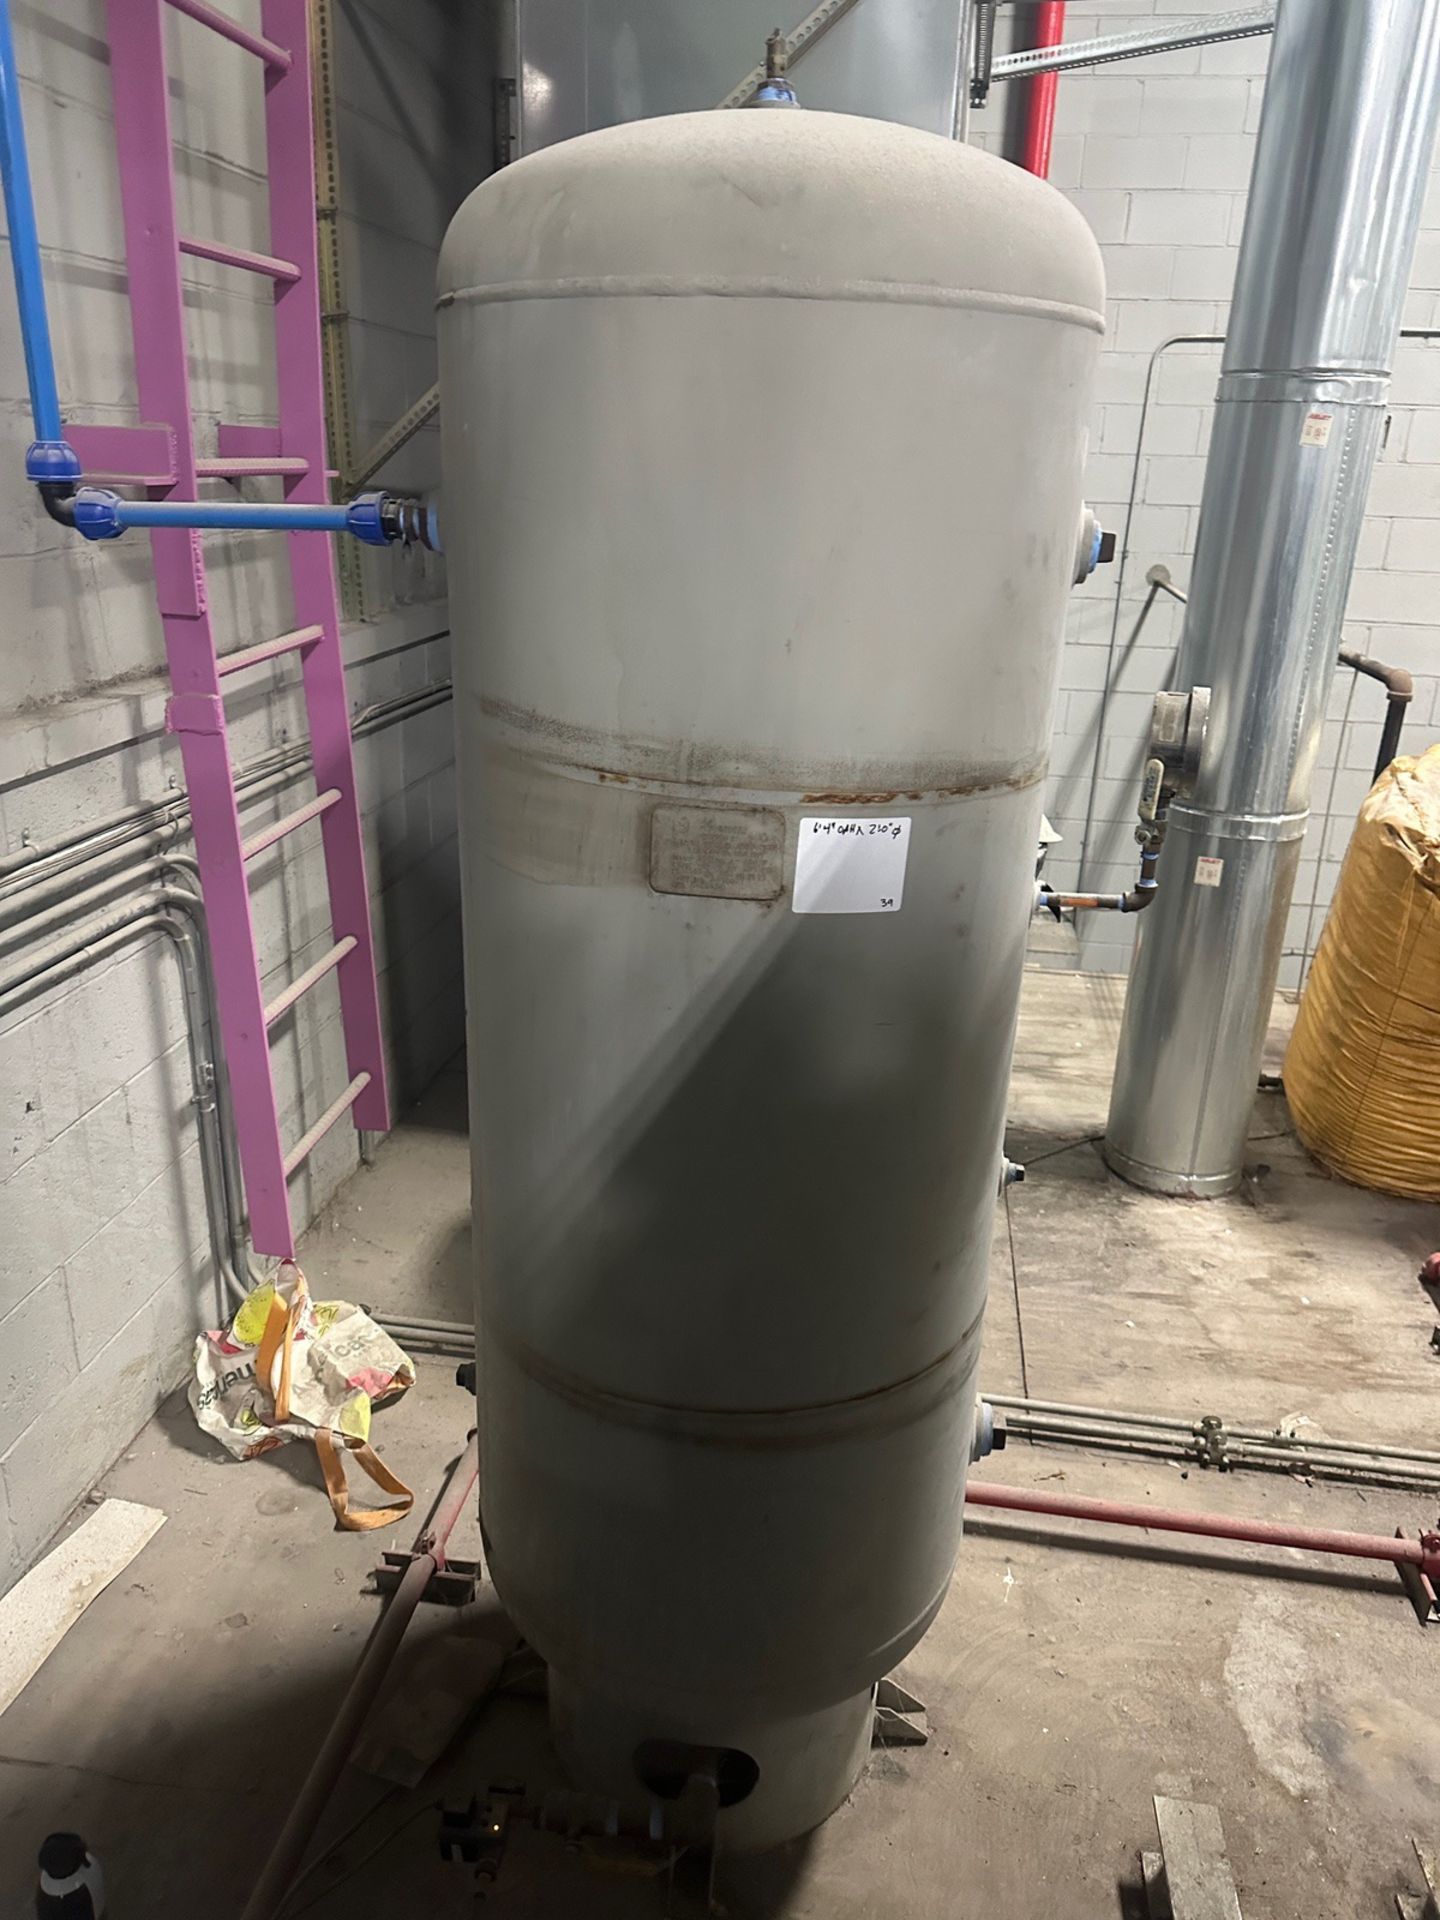 Compressed Air Receiver Tank, Approx 6'-4" x 2' Dia | Rig Fee $350